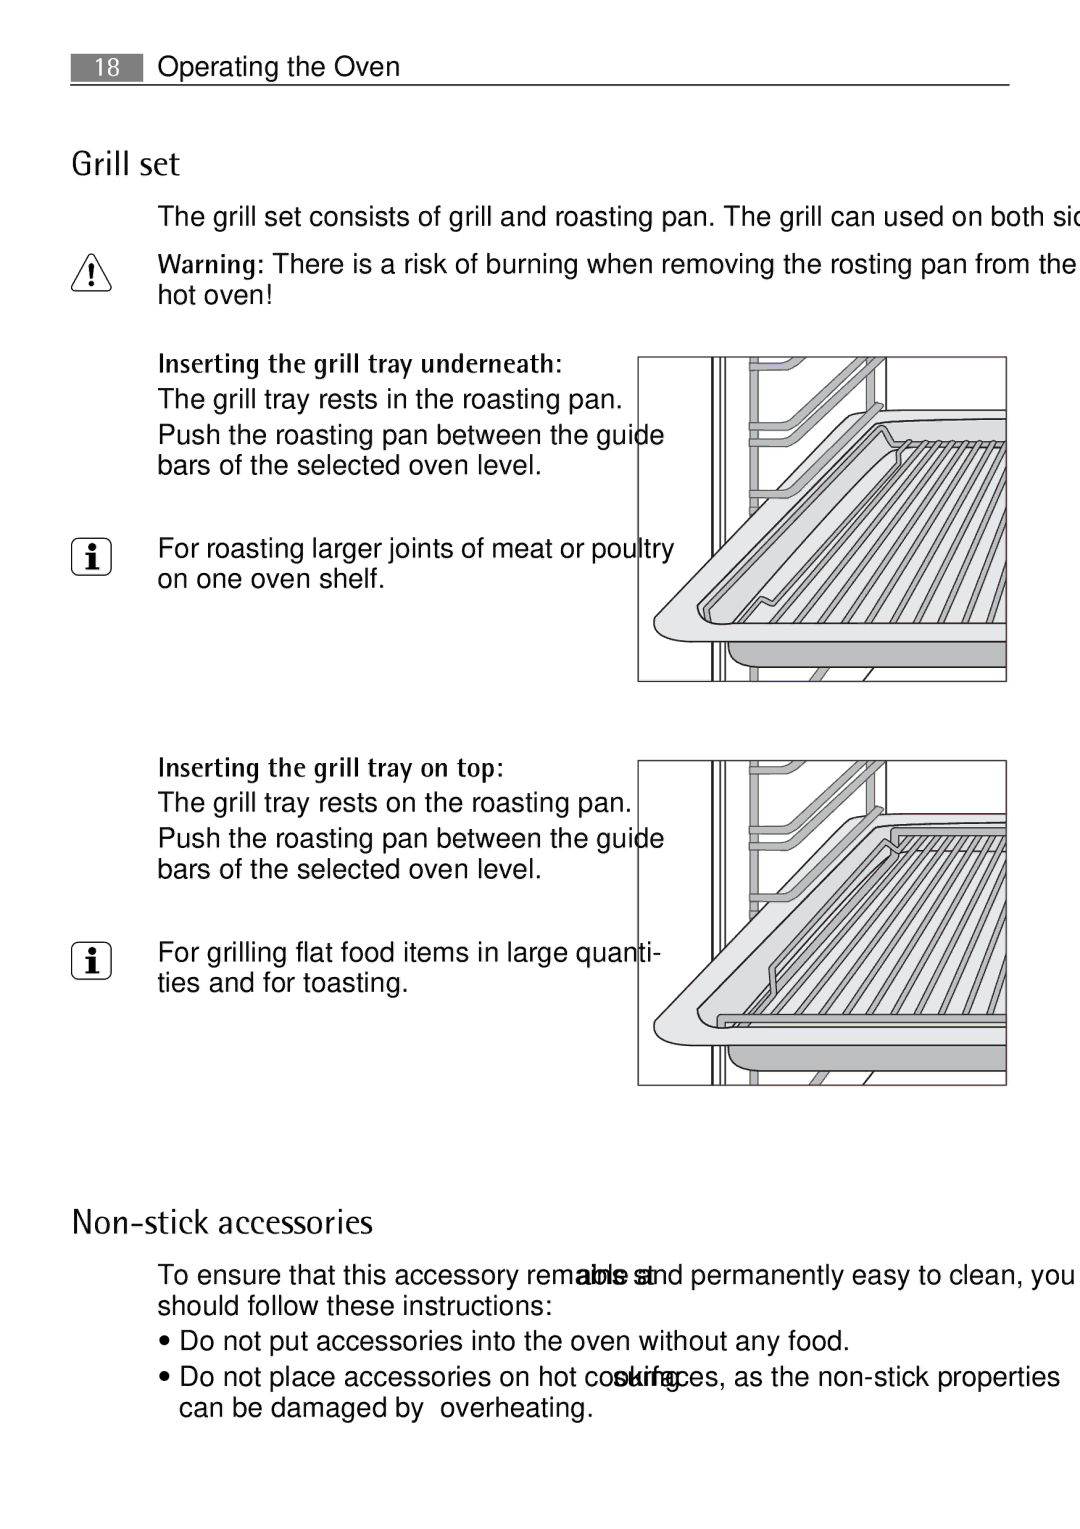 Electrolux B57415B, B57415A Non-stick accessories, Inserting the grill tray underneath, Inserting the grill tray on top 